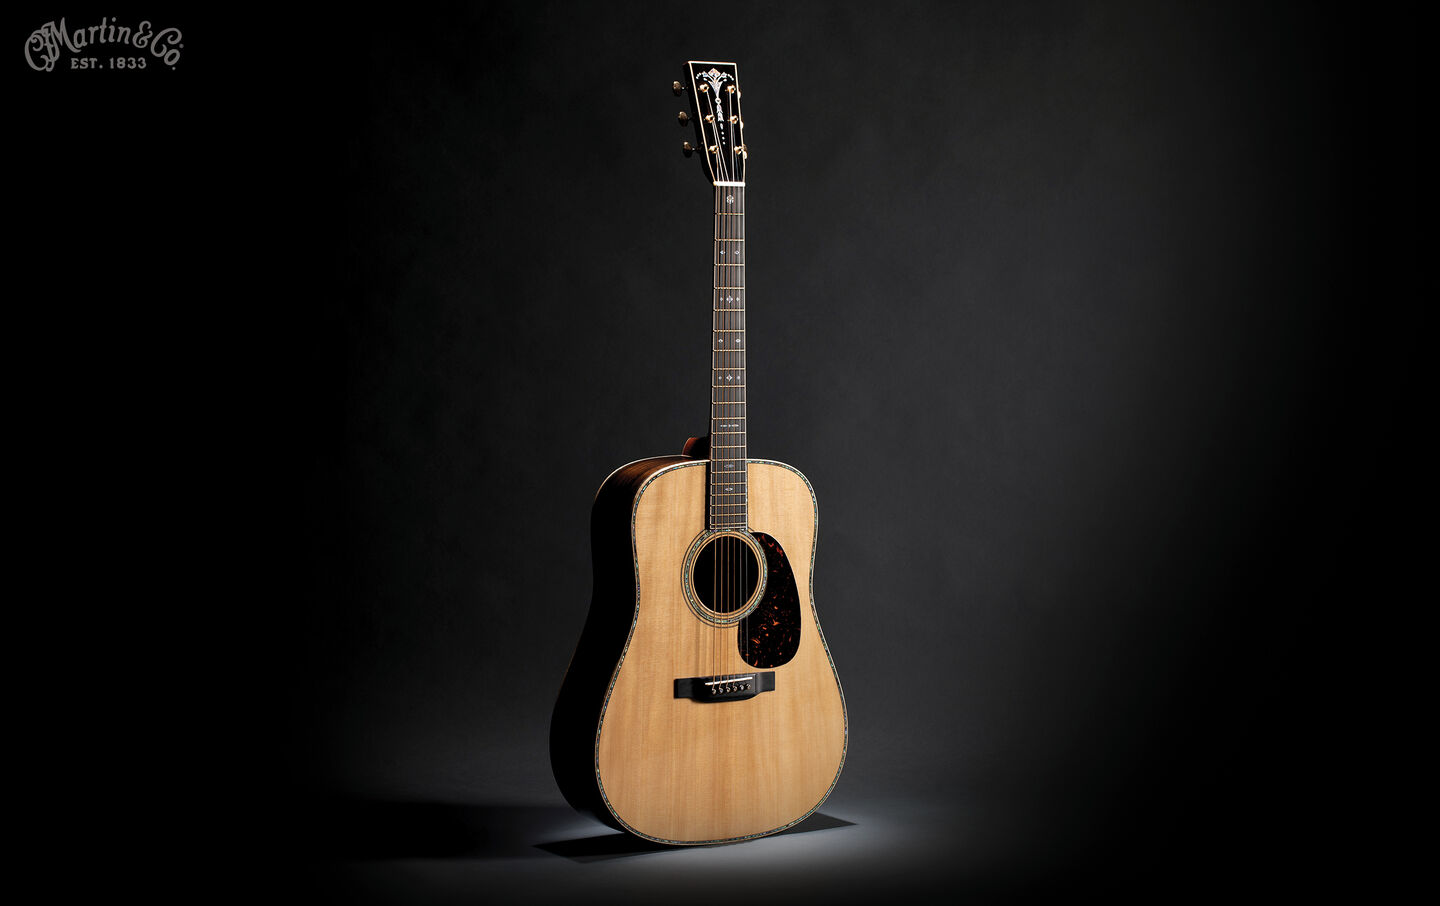 A dramatically lit acoustic guitar against a black background